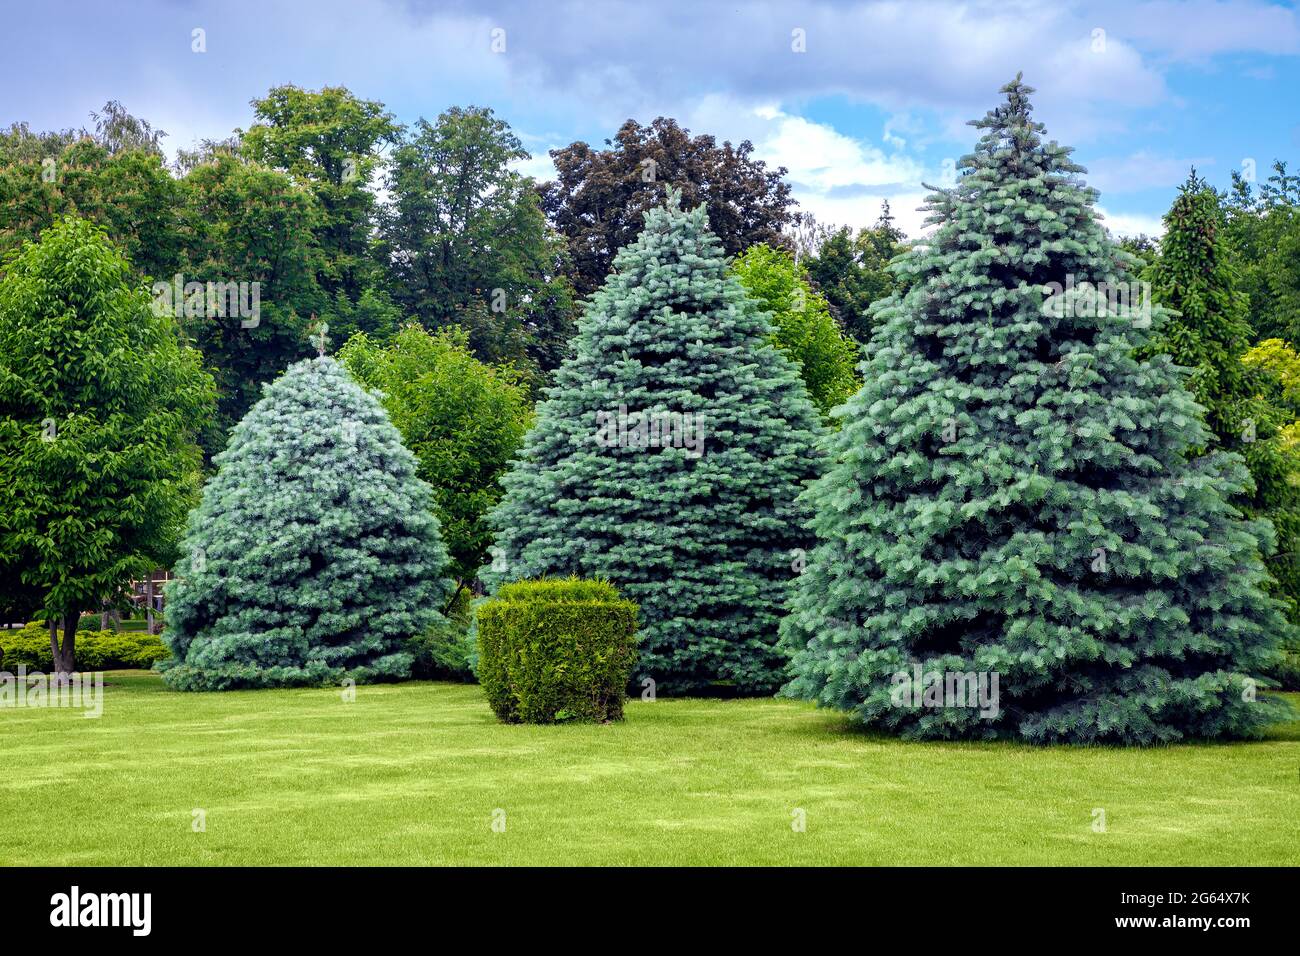 coniferous trees on a lawn with a lawn and a trimmed bush in a park with deciduous trees, summer green nature landscape with clouds in the sky. Stock Photo